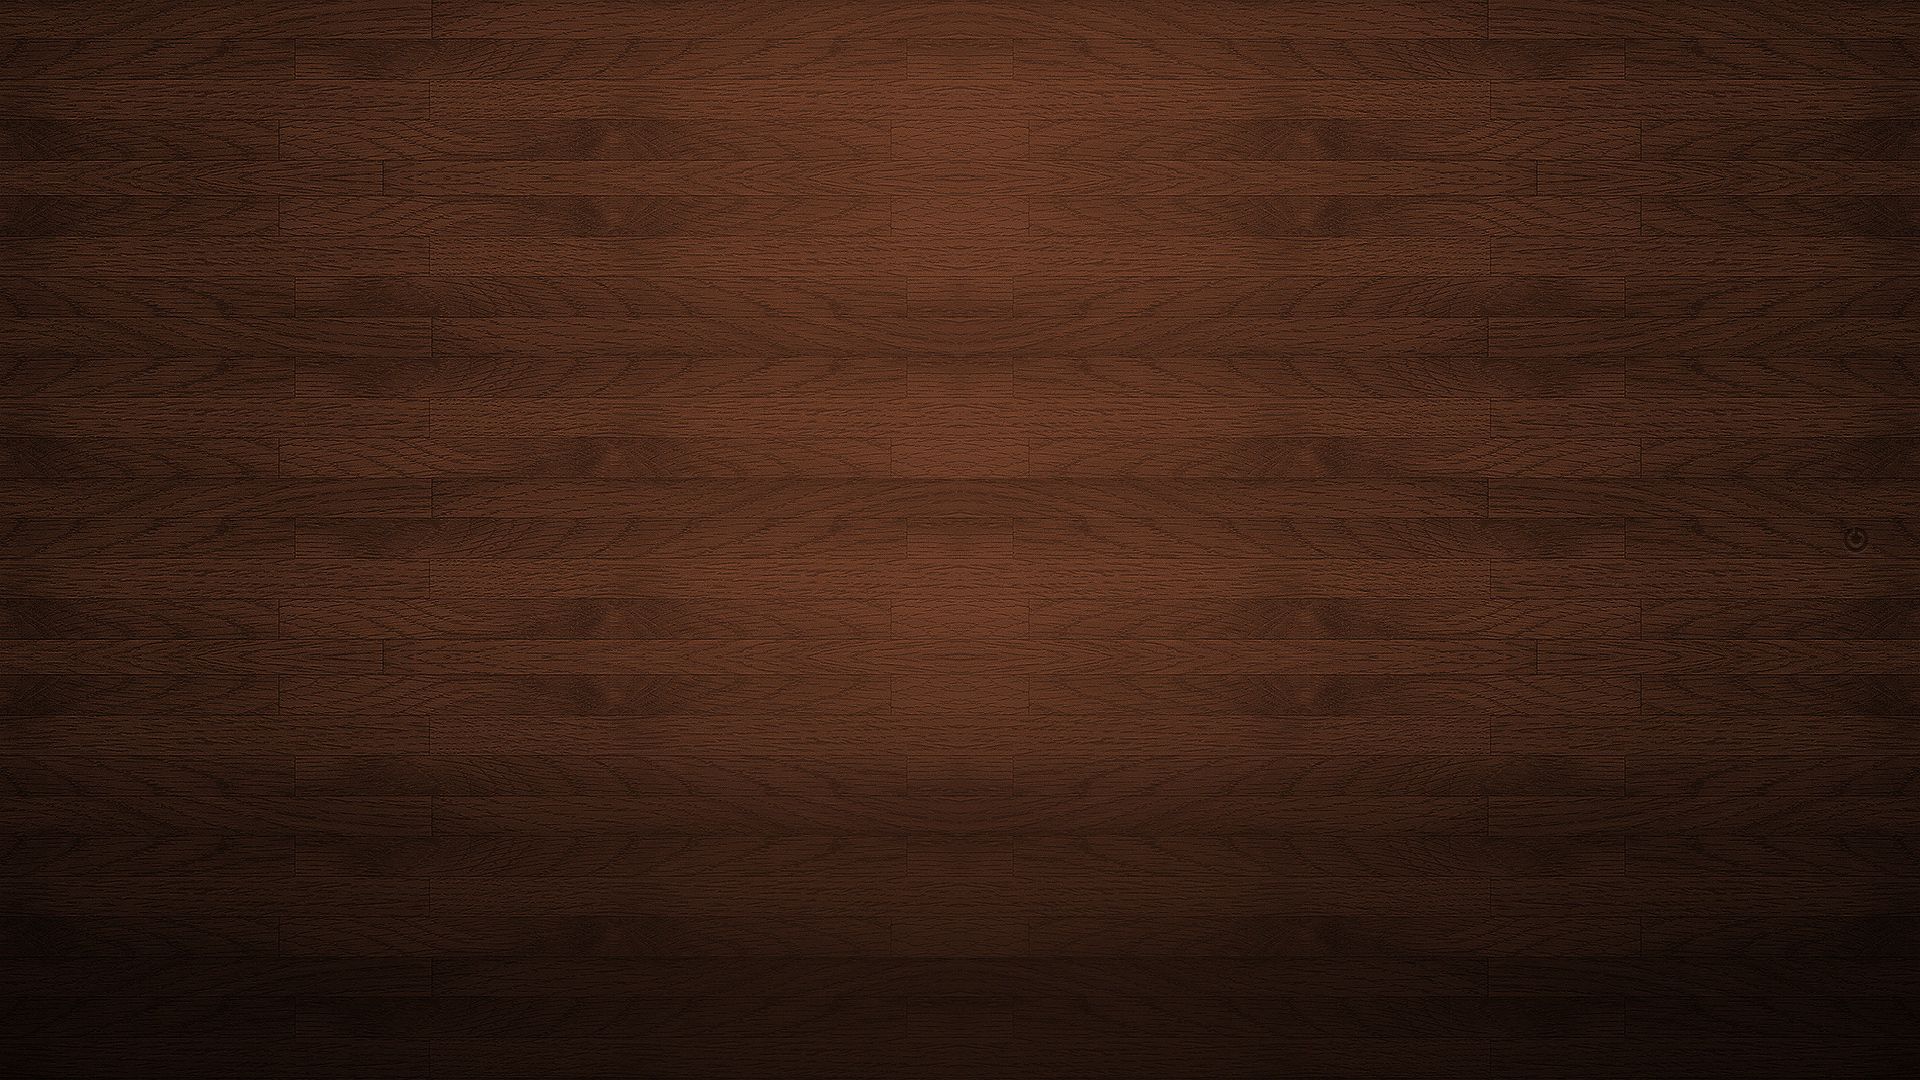 android wood, dark, wooden, shadow, board, texture, textures, surface